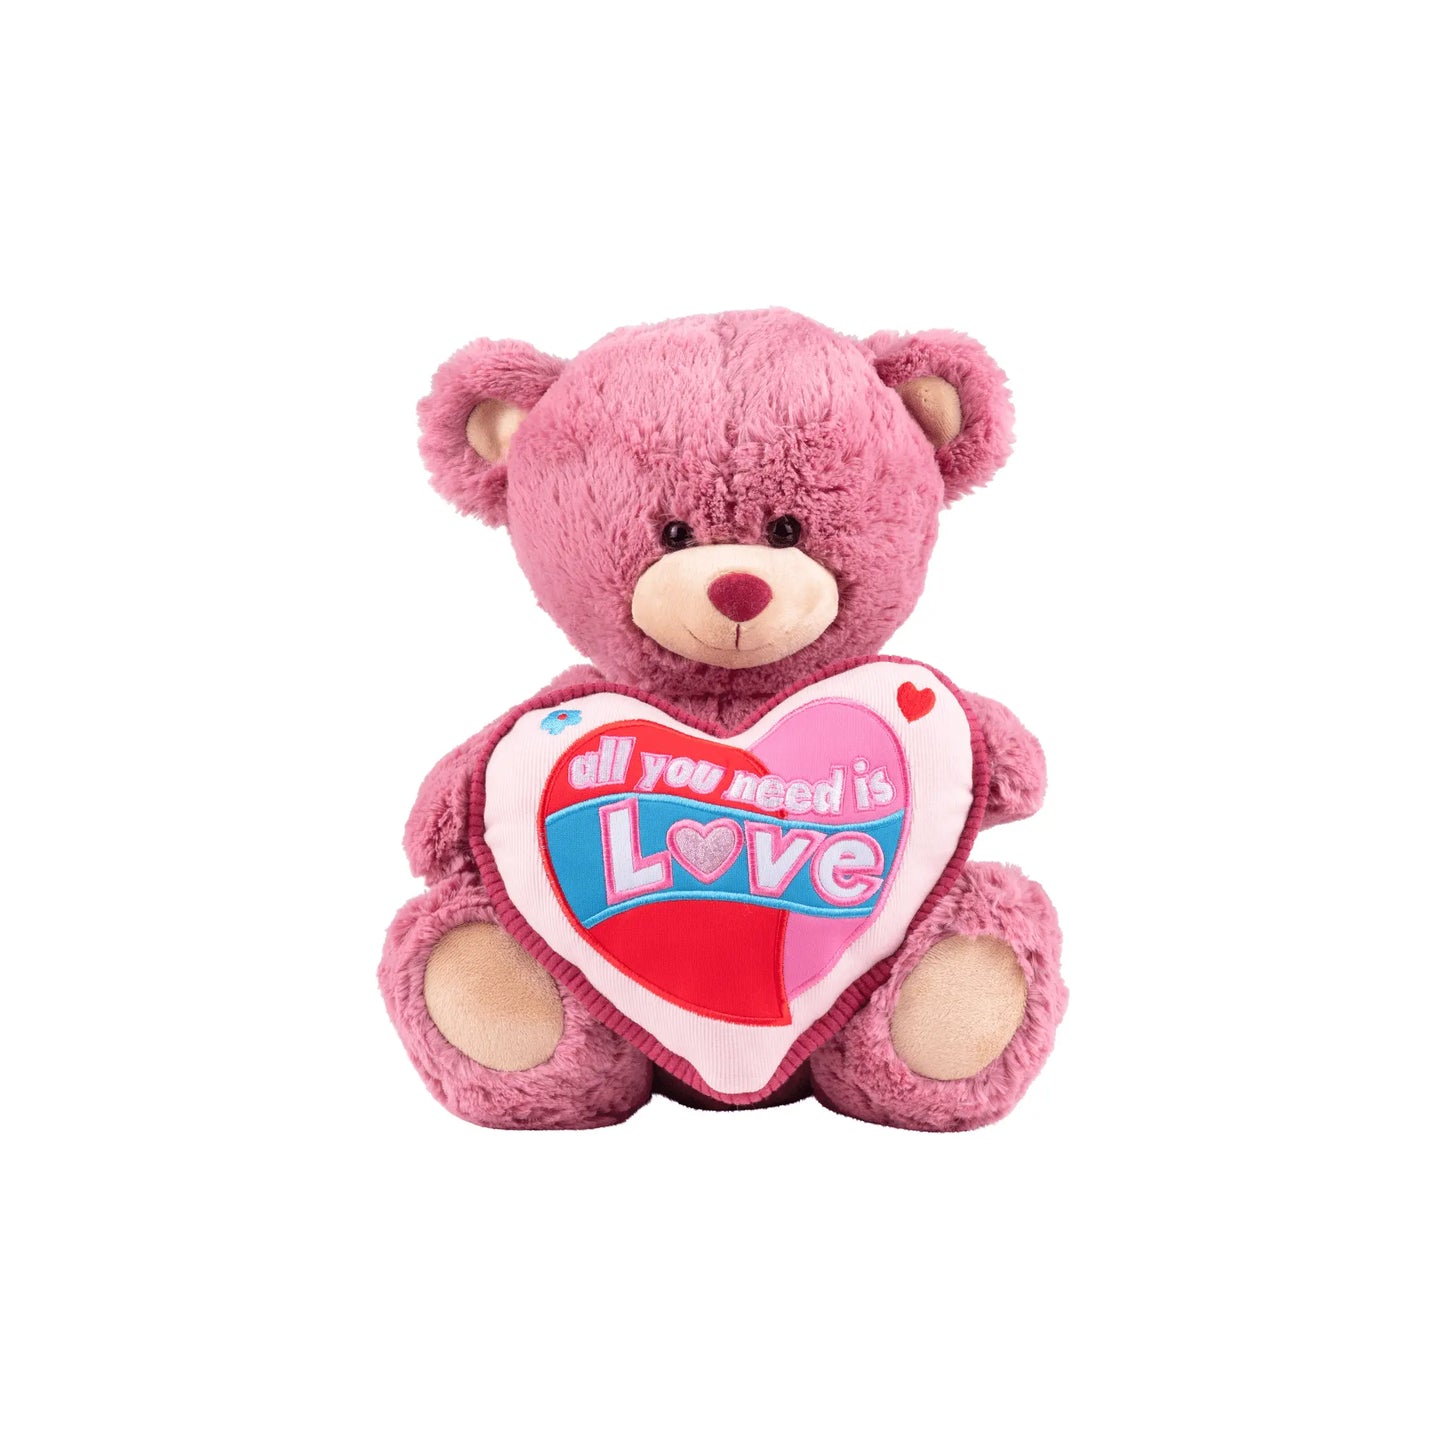 All you need is love bear 21 cm